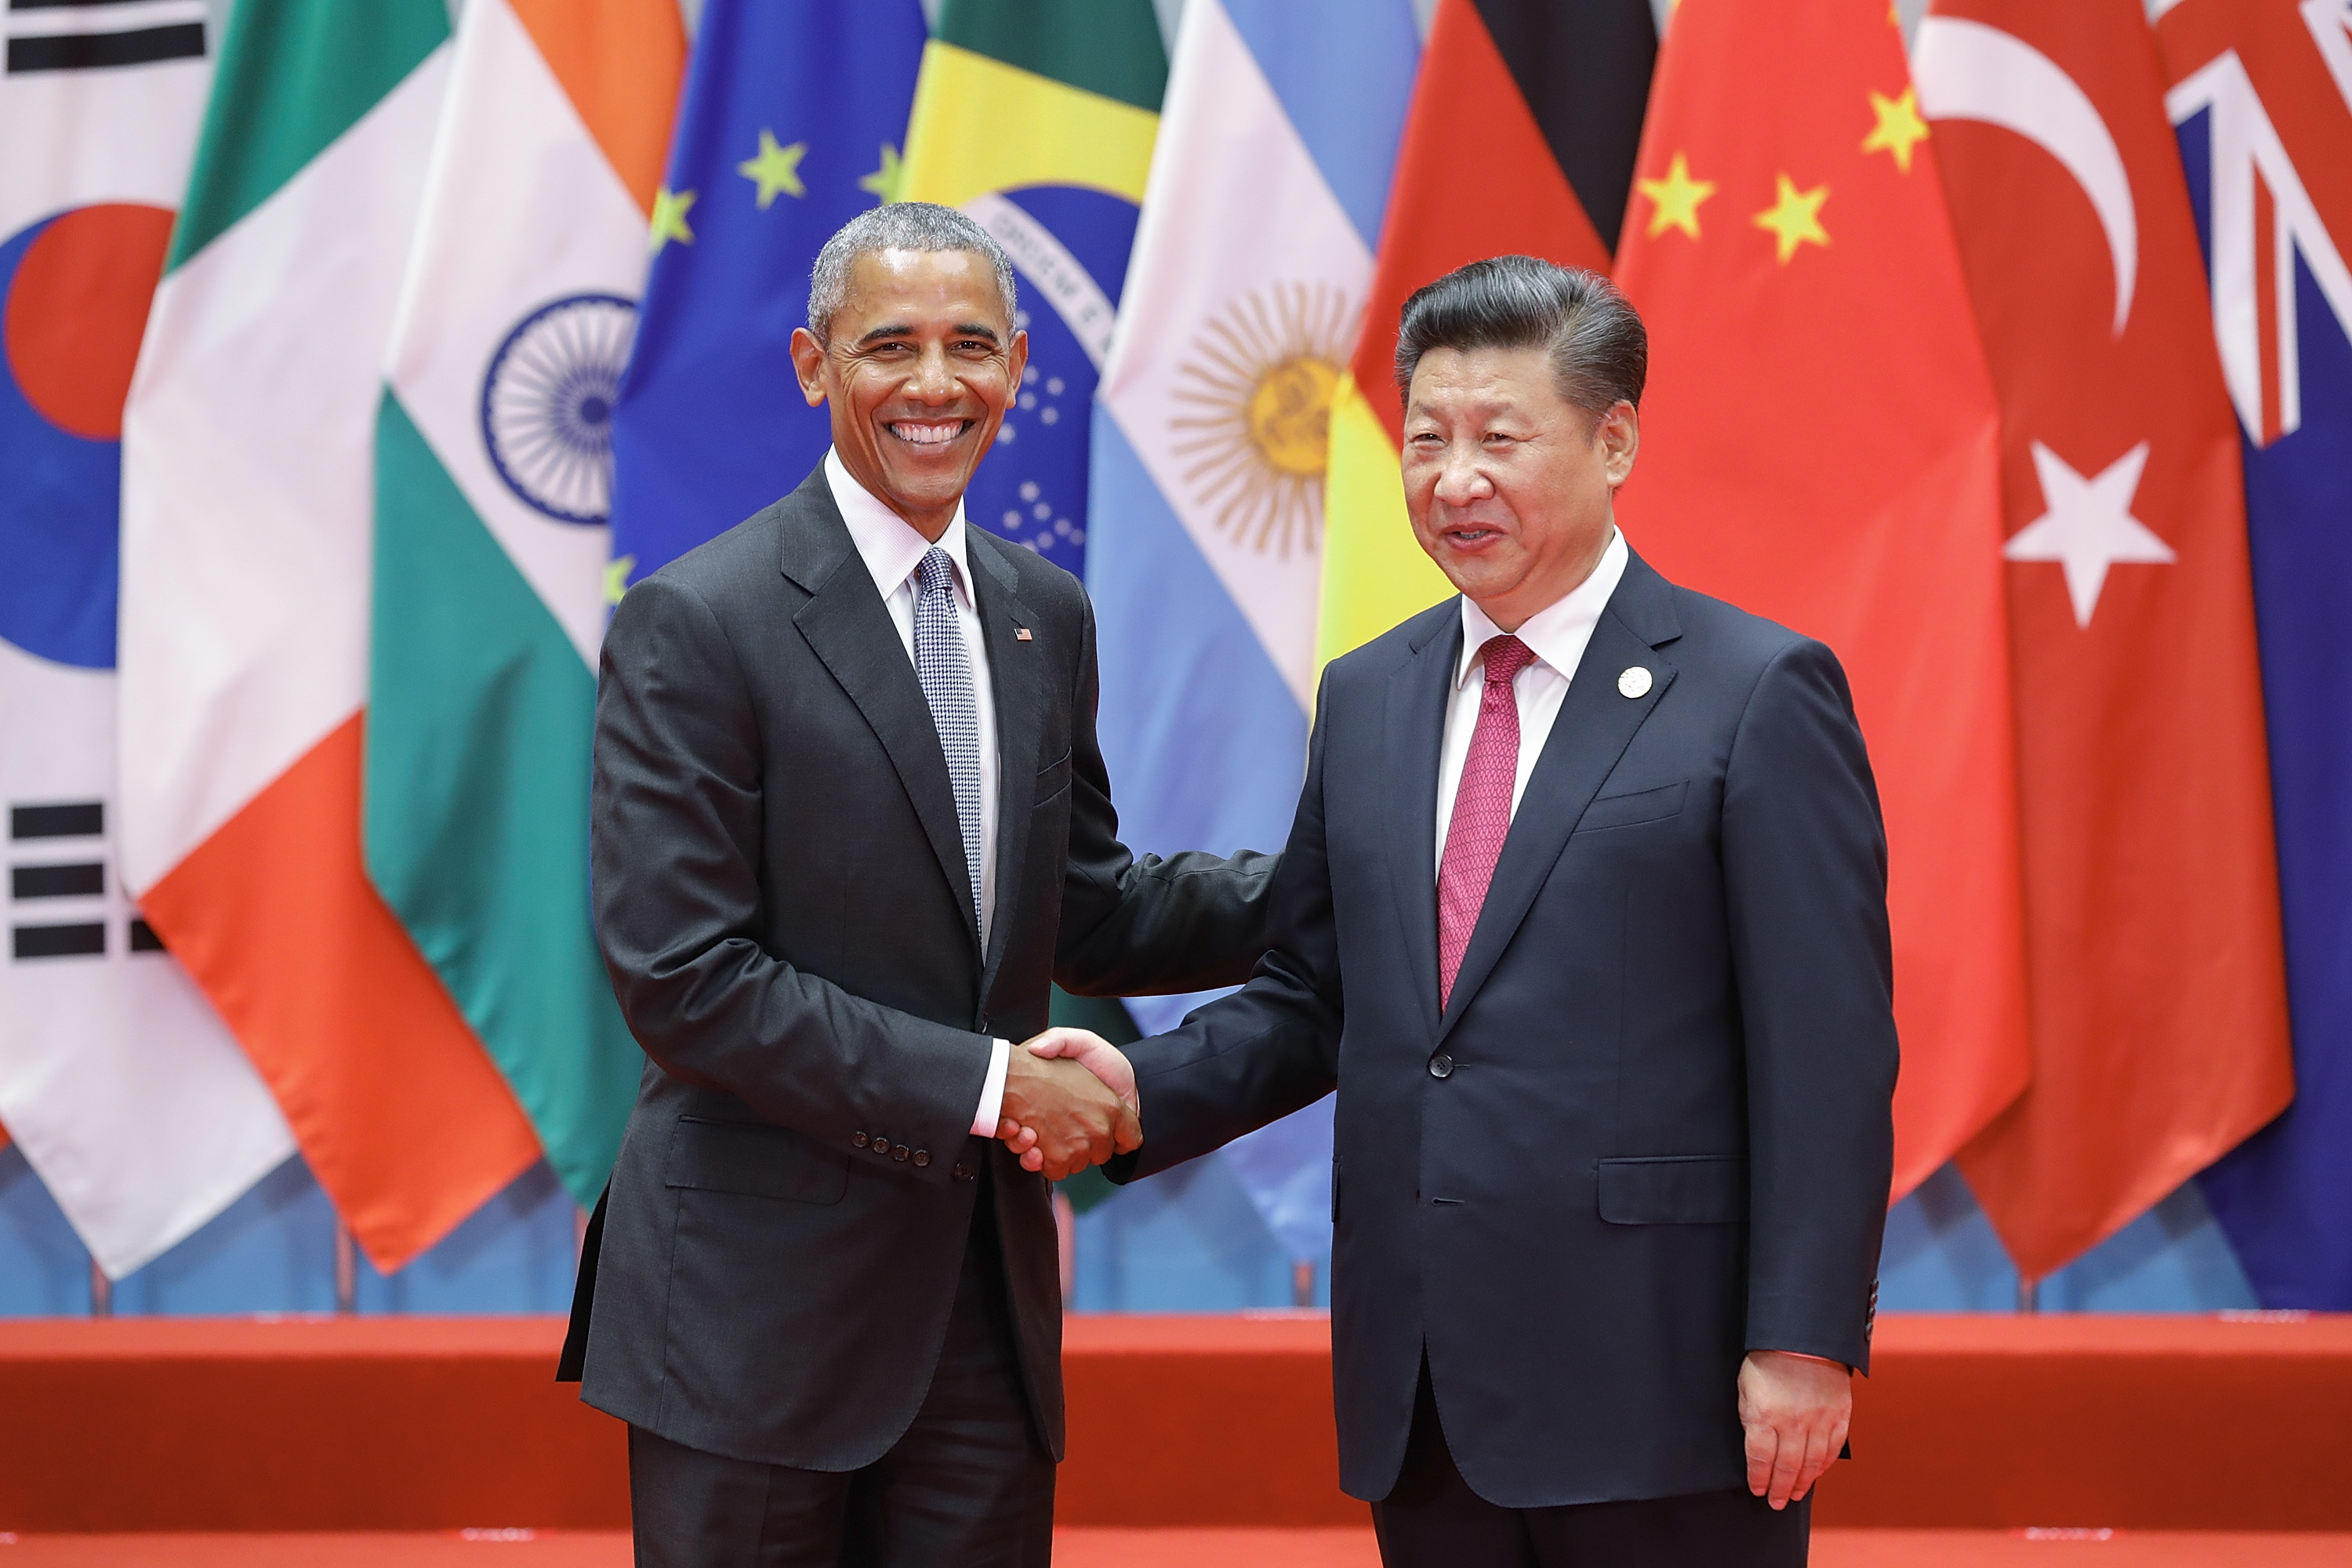 HANGZHOU, CHINA - SEPTEMBER 04:  Chinese President Xi Jinping (right) shakes hands with U.S. President Barack Obama to the G20 Summit on September 4, 2016 in Hangzhou, China. World leaders are gathering in Hangzhou for the 11th G20 Leaders Summit from September 4 to 5.  (Photo by Lintao Zhang/Getty Images)